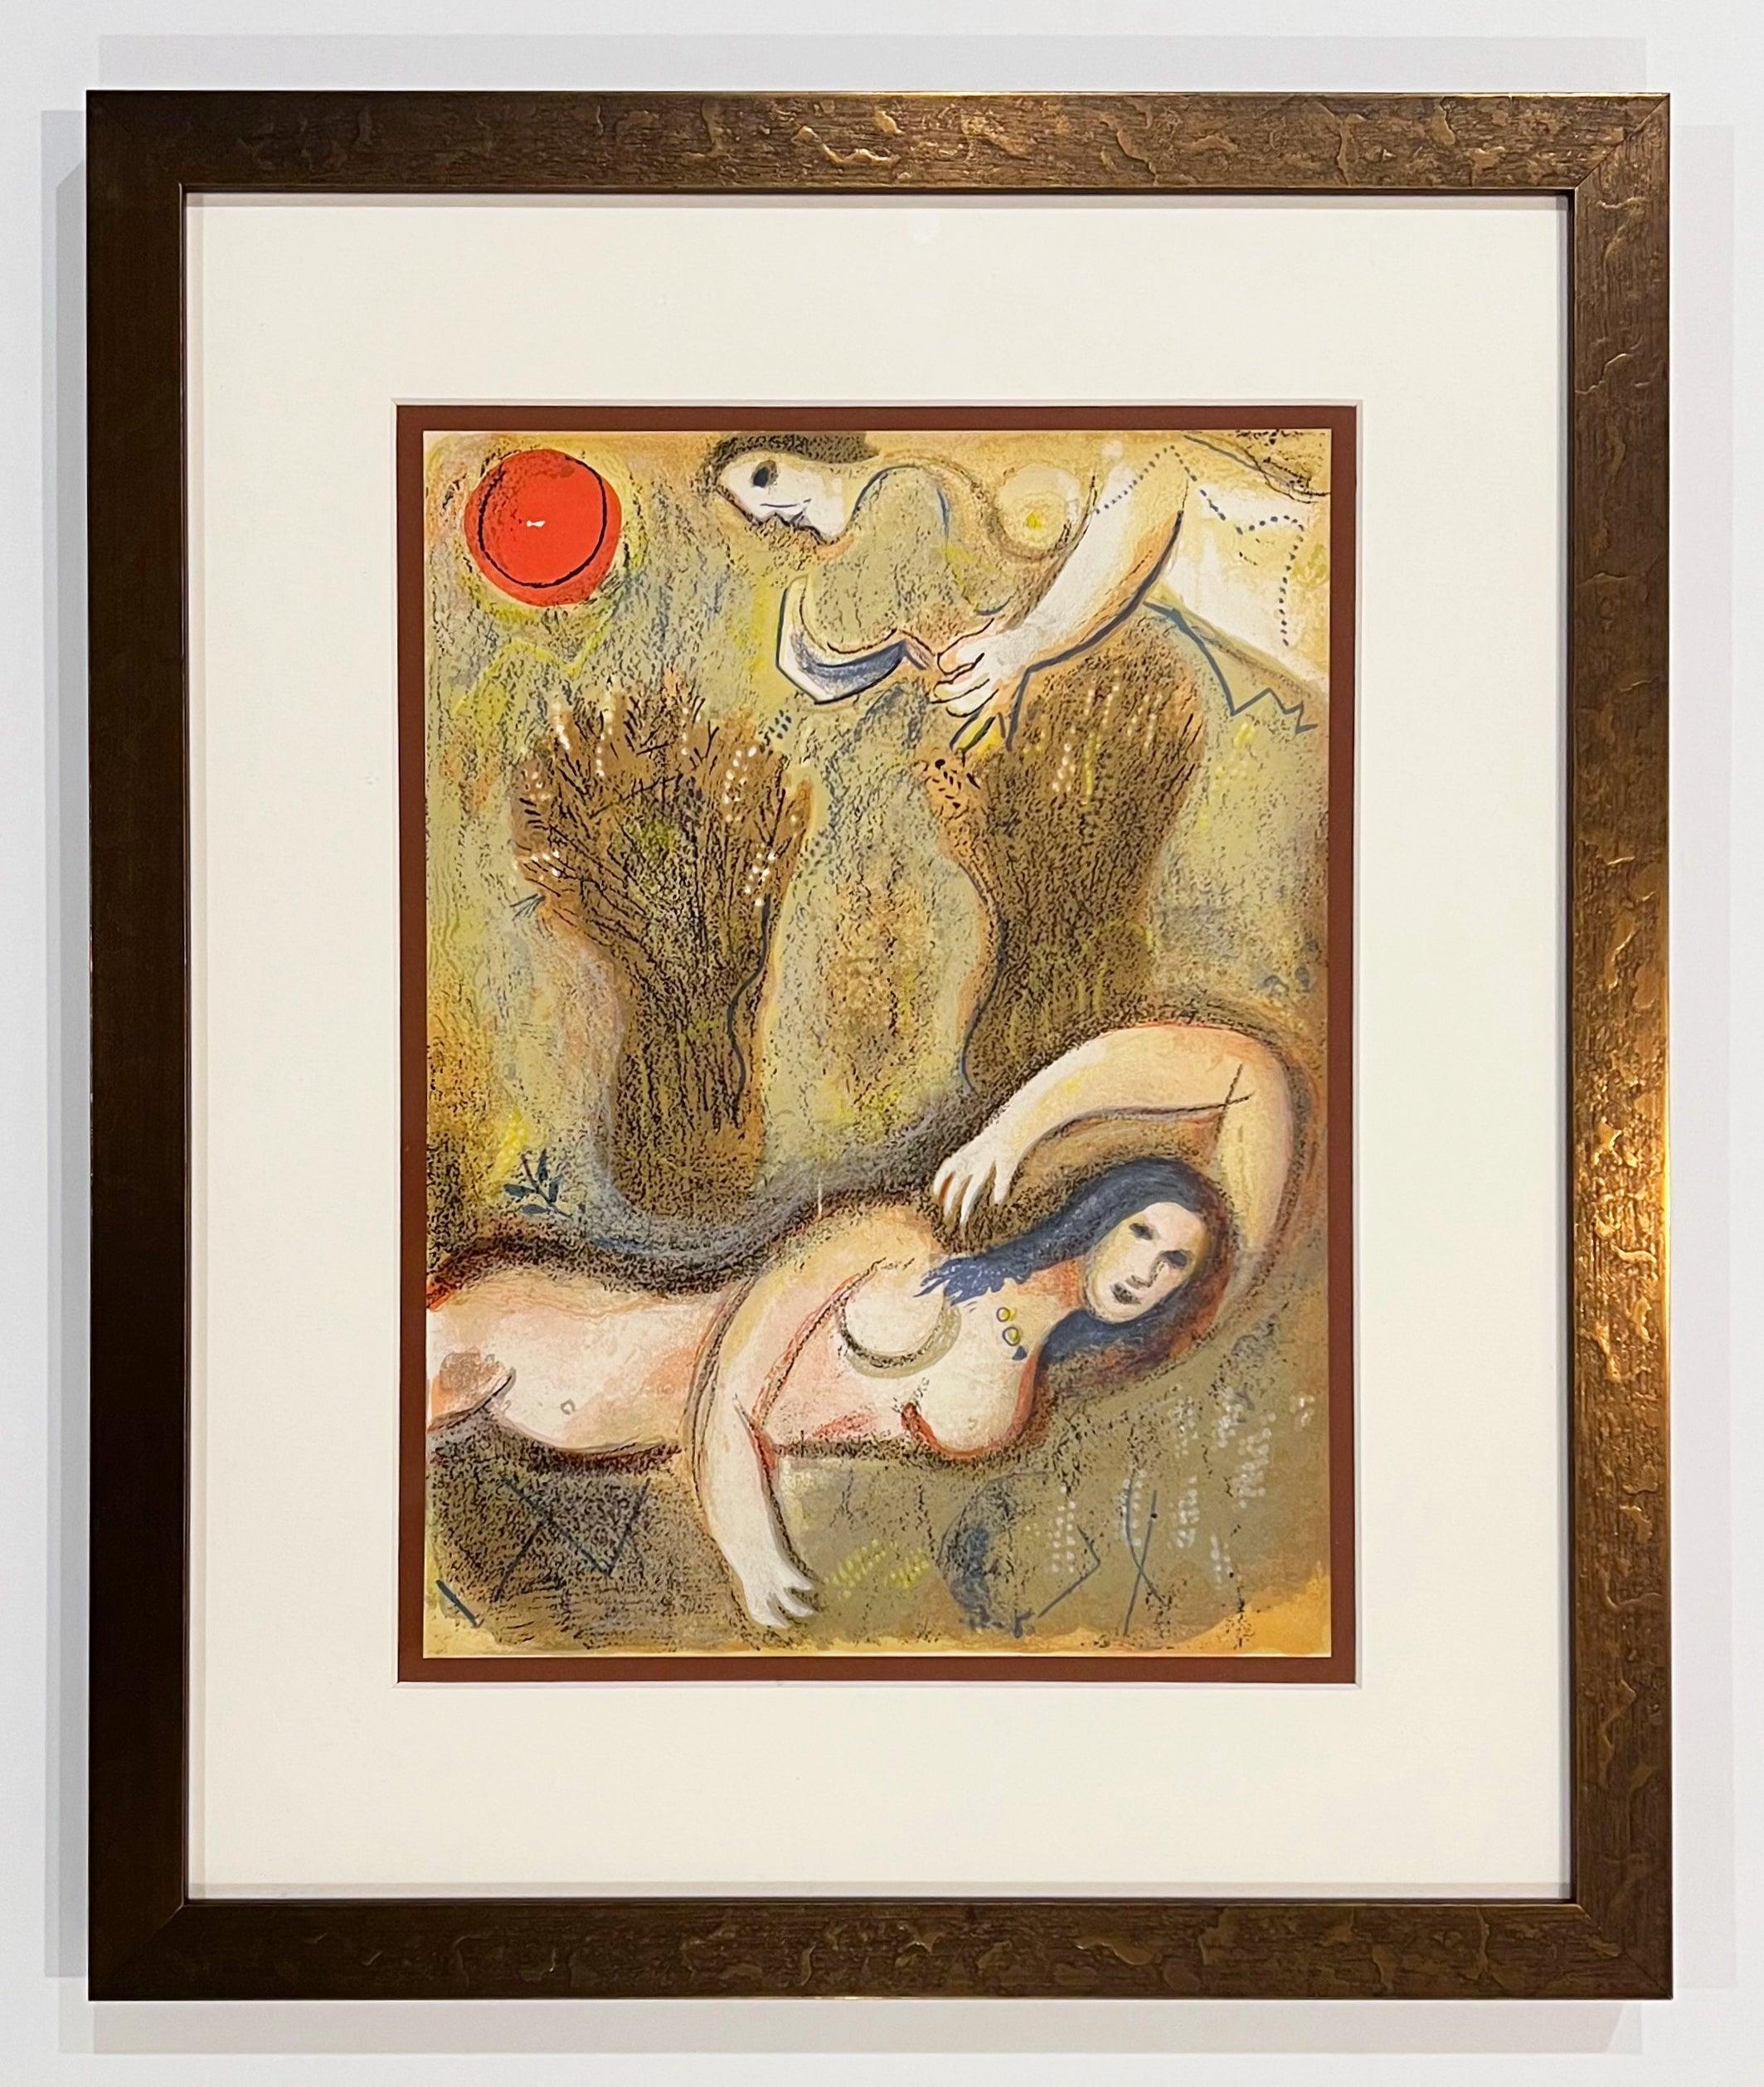 Boaz Wakes Up and Sees Ruth at His Feet - Print by Marc Chagall